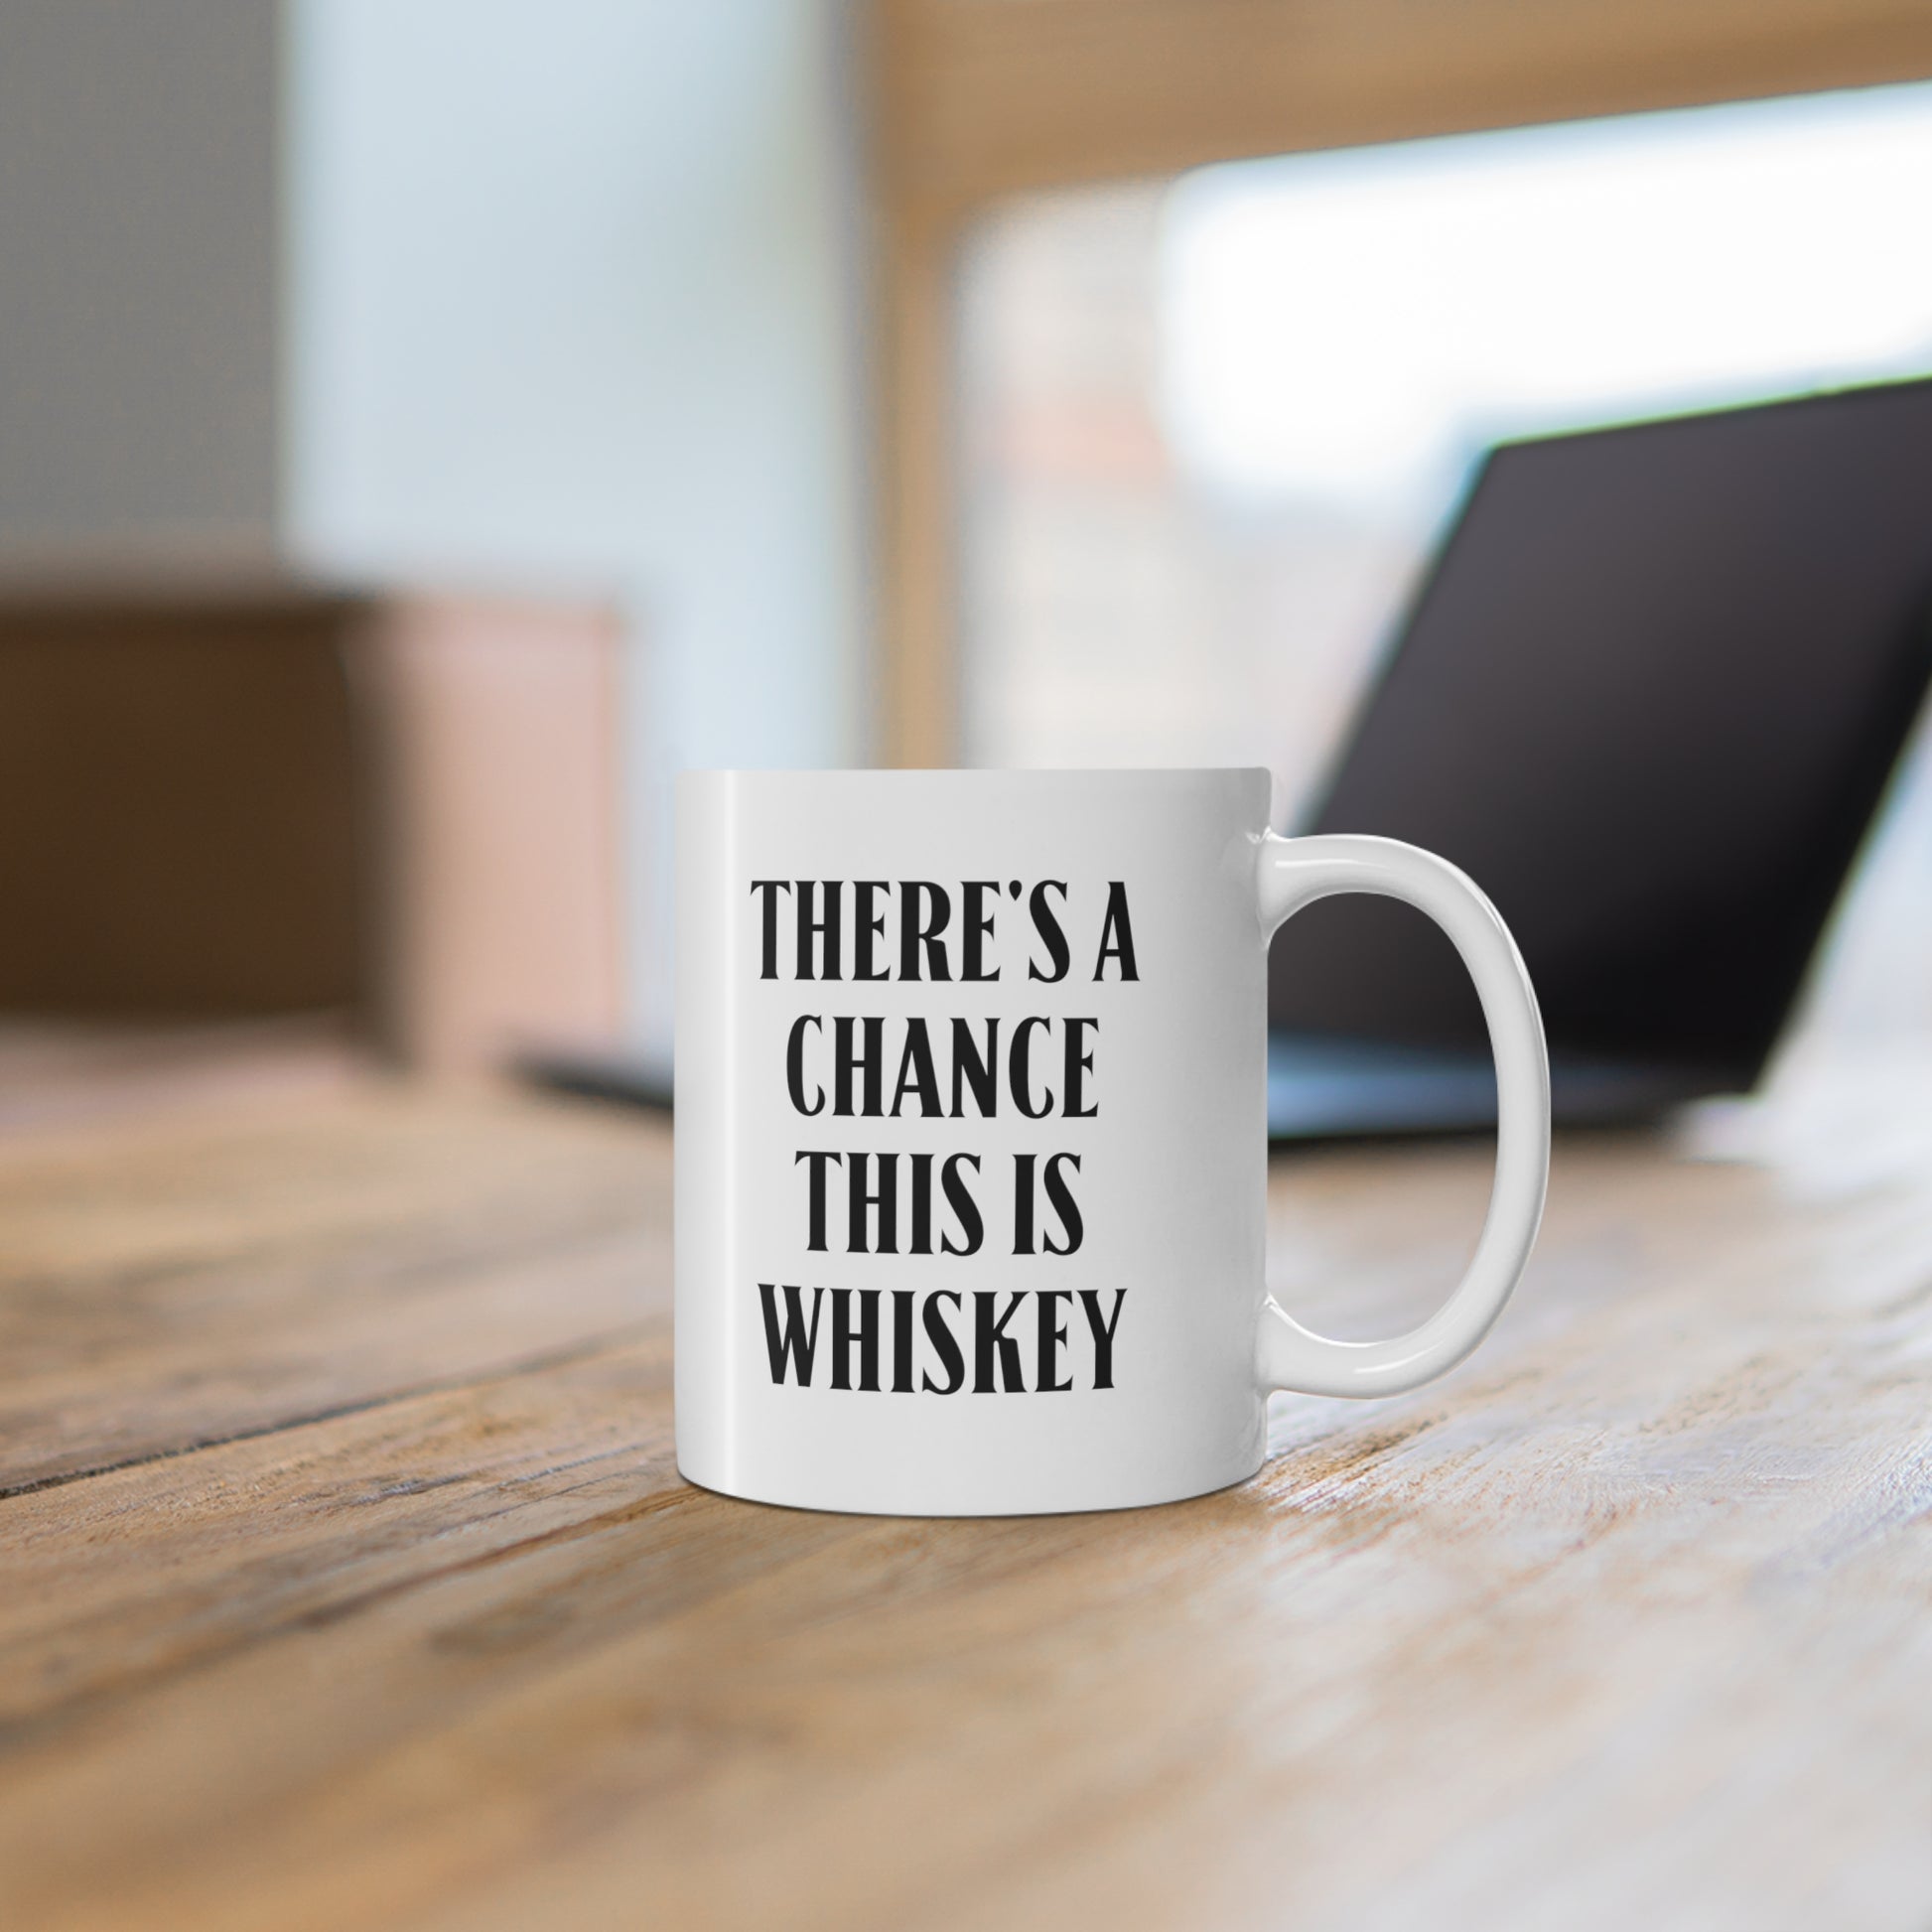 11oz ceramic mug with quote There's a chance this is whiskey